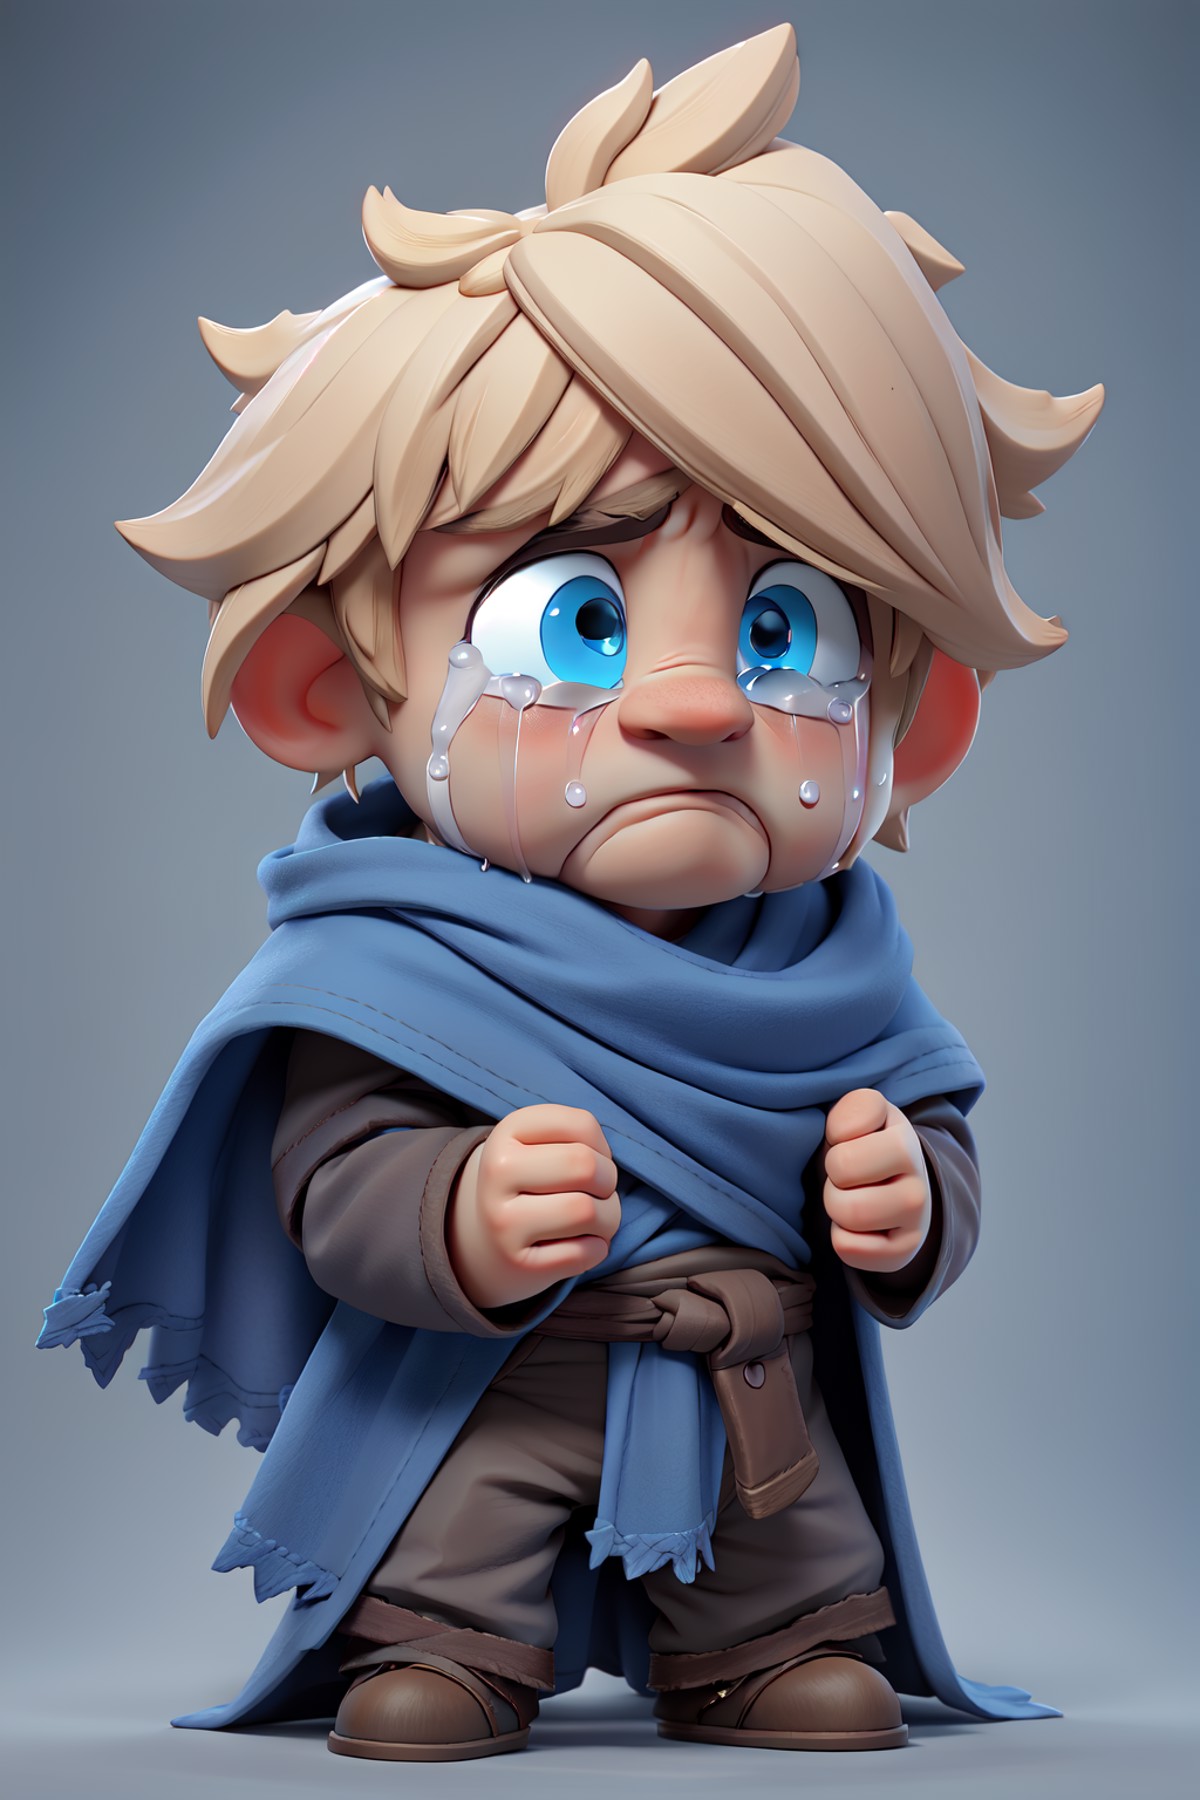 masterpiece, best quality, a sad blonde little boy wearing blue outfit crying with tears, blue background